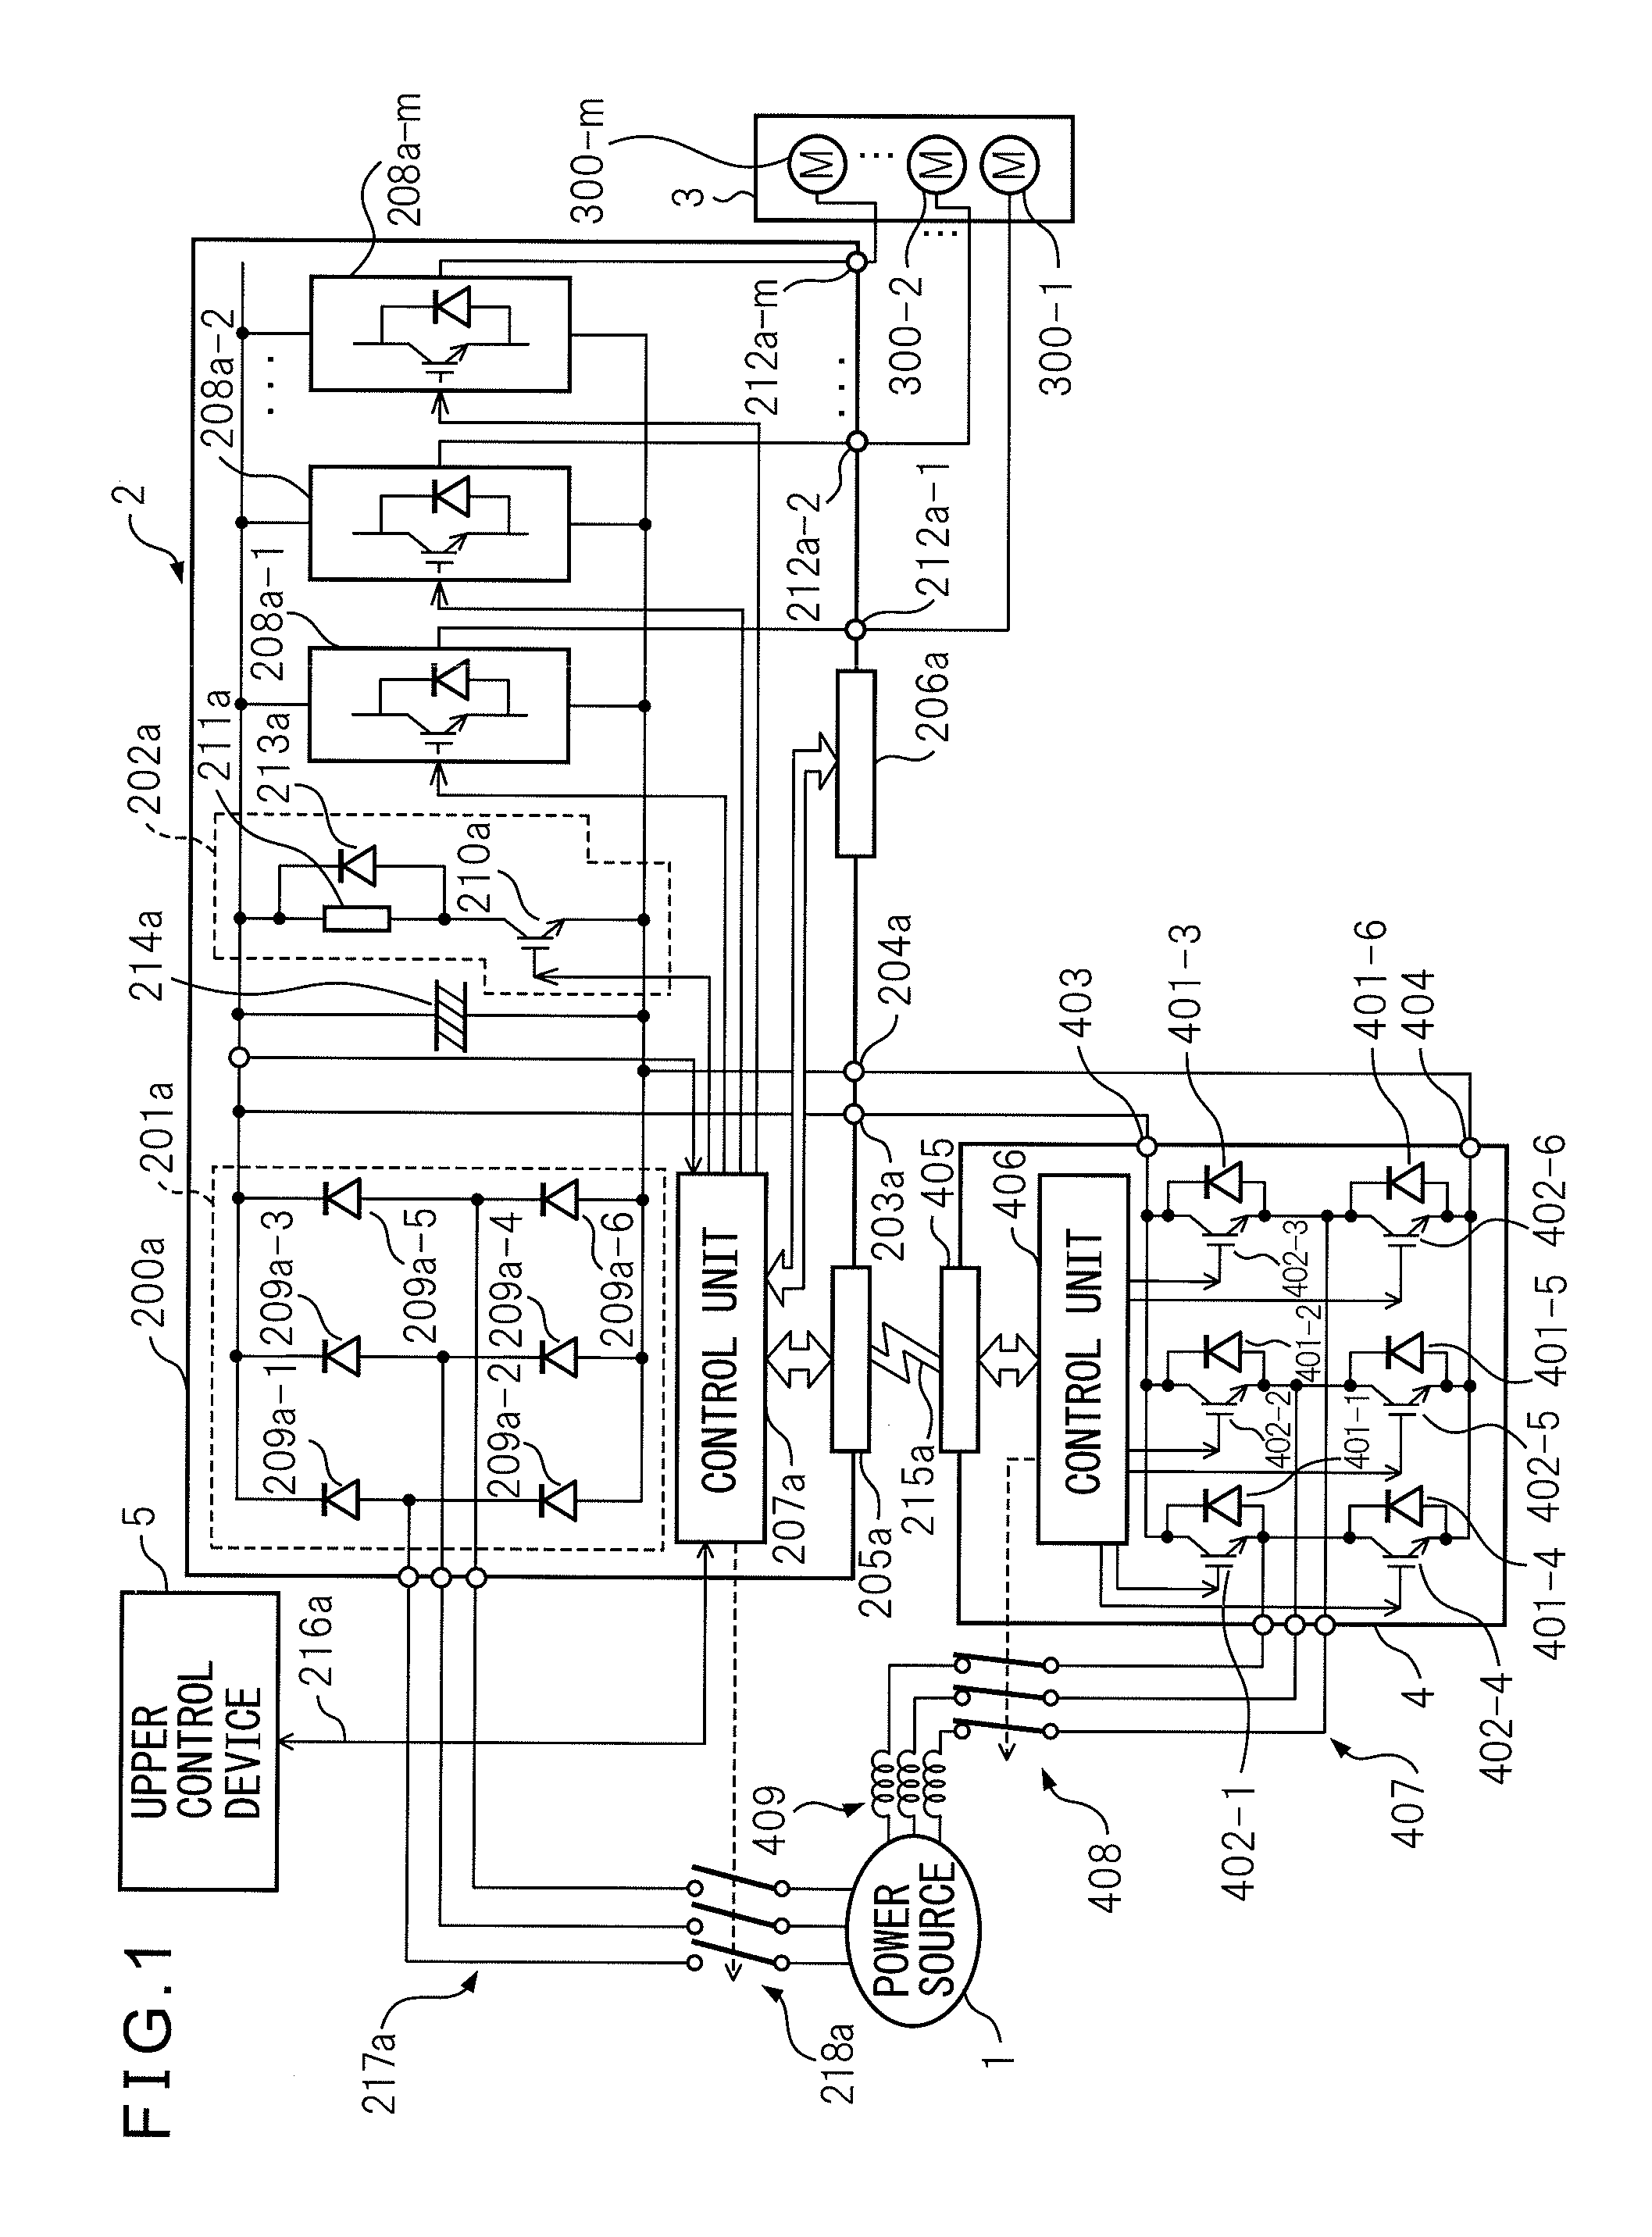 Servomotor drive device that drives servomotor connected to rotating shaft